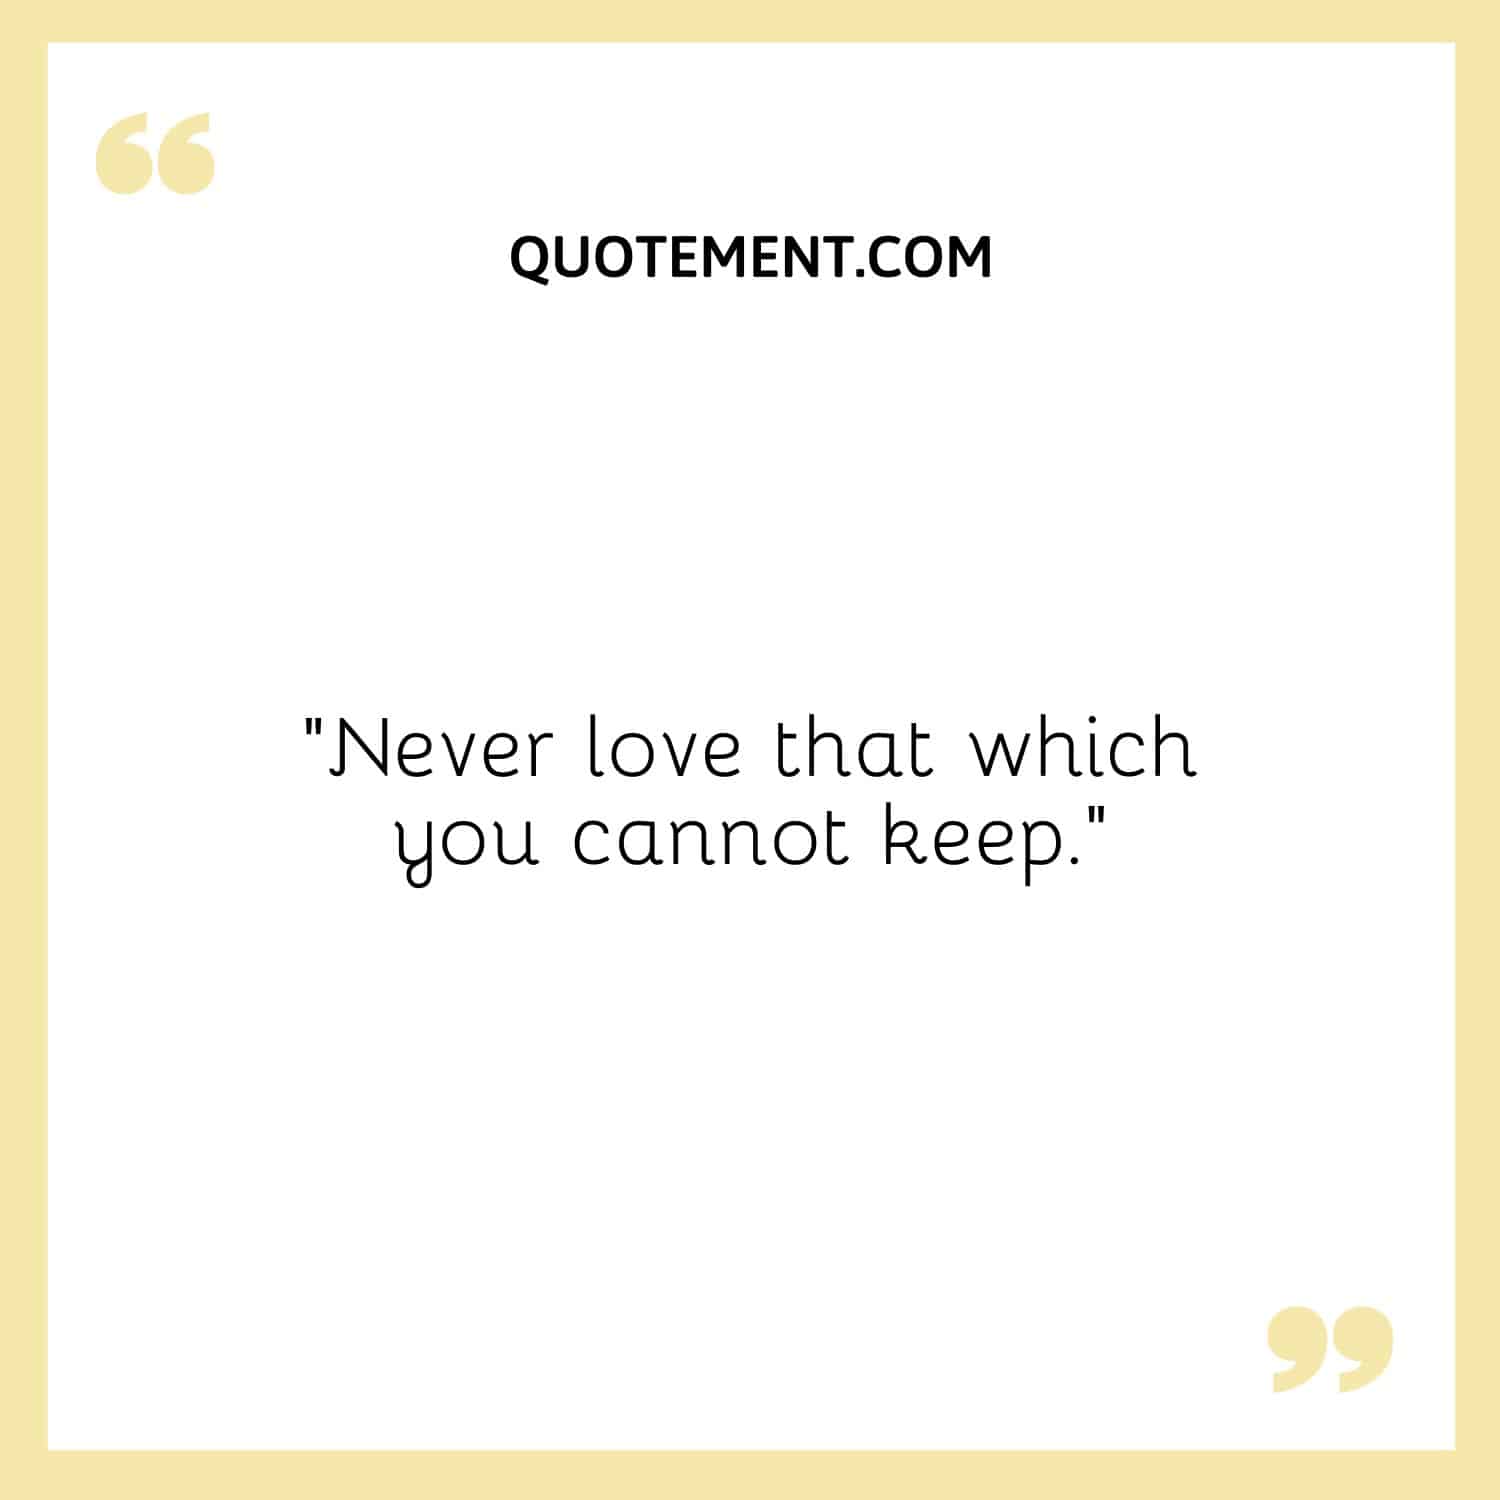 Never love that which you cannot keep